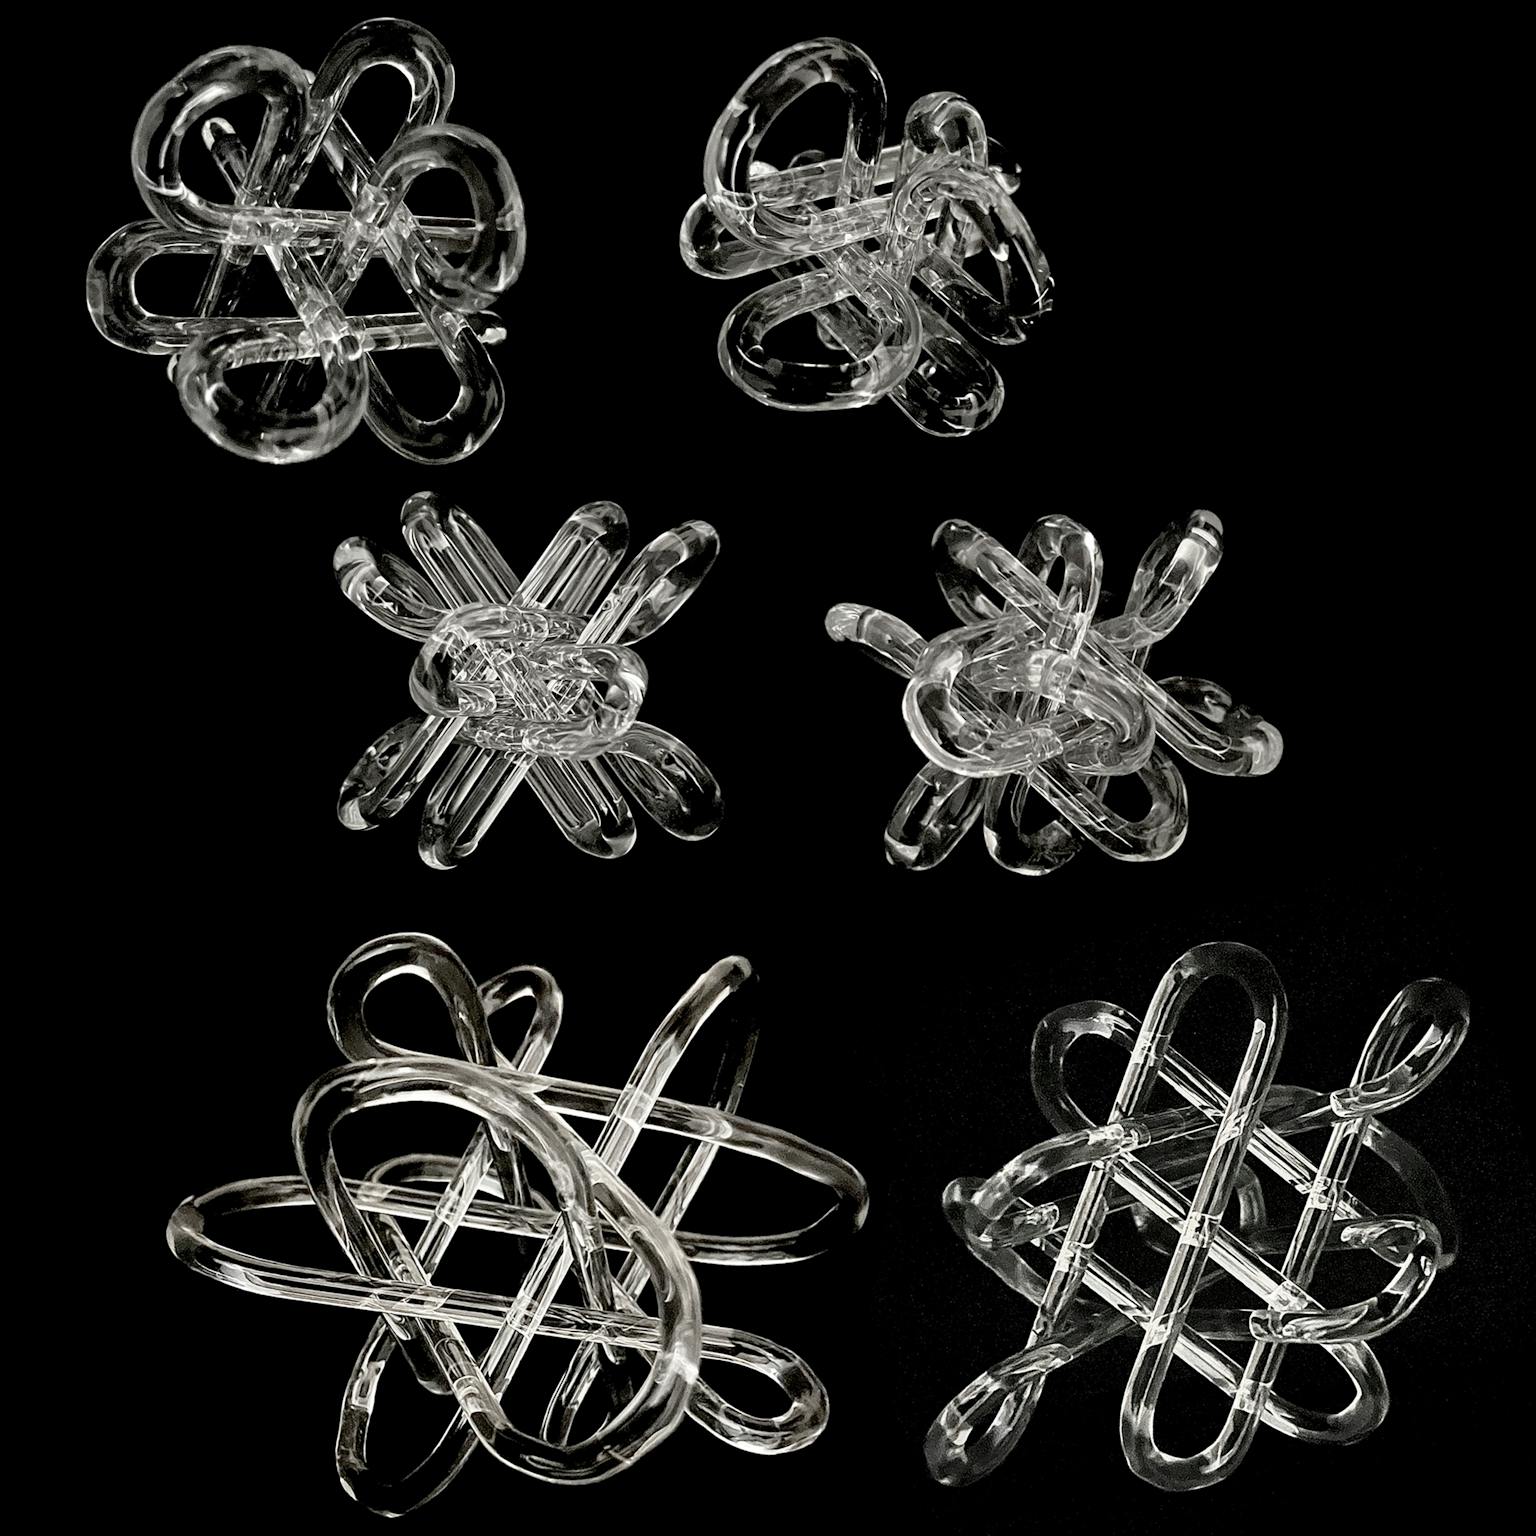 Image for entry 'The 6 Invariant Cubic Rod Packings as 12 Stick Knots '